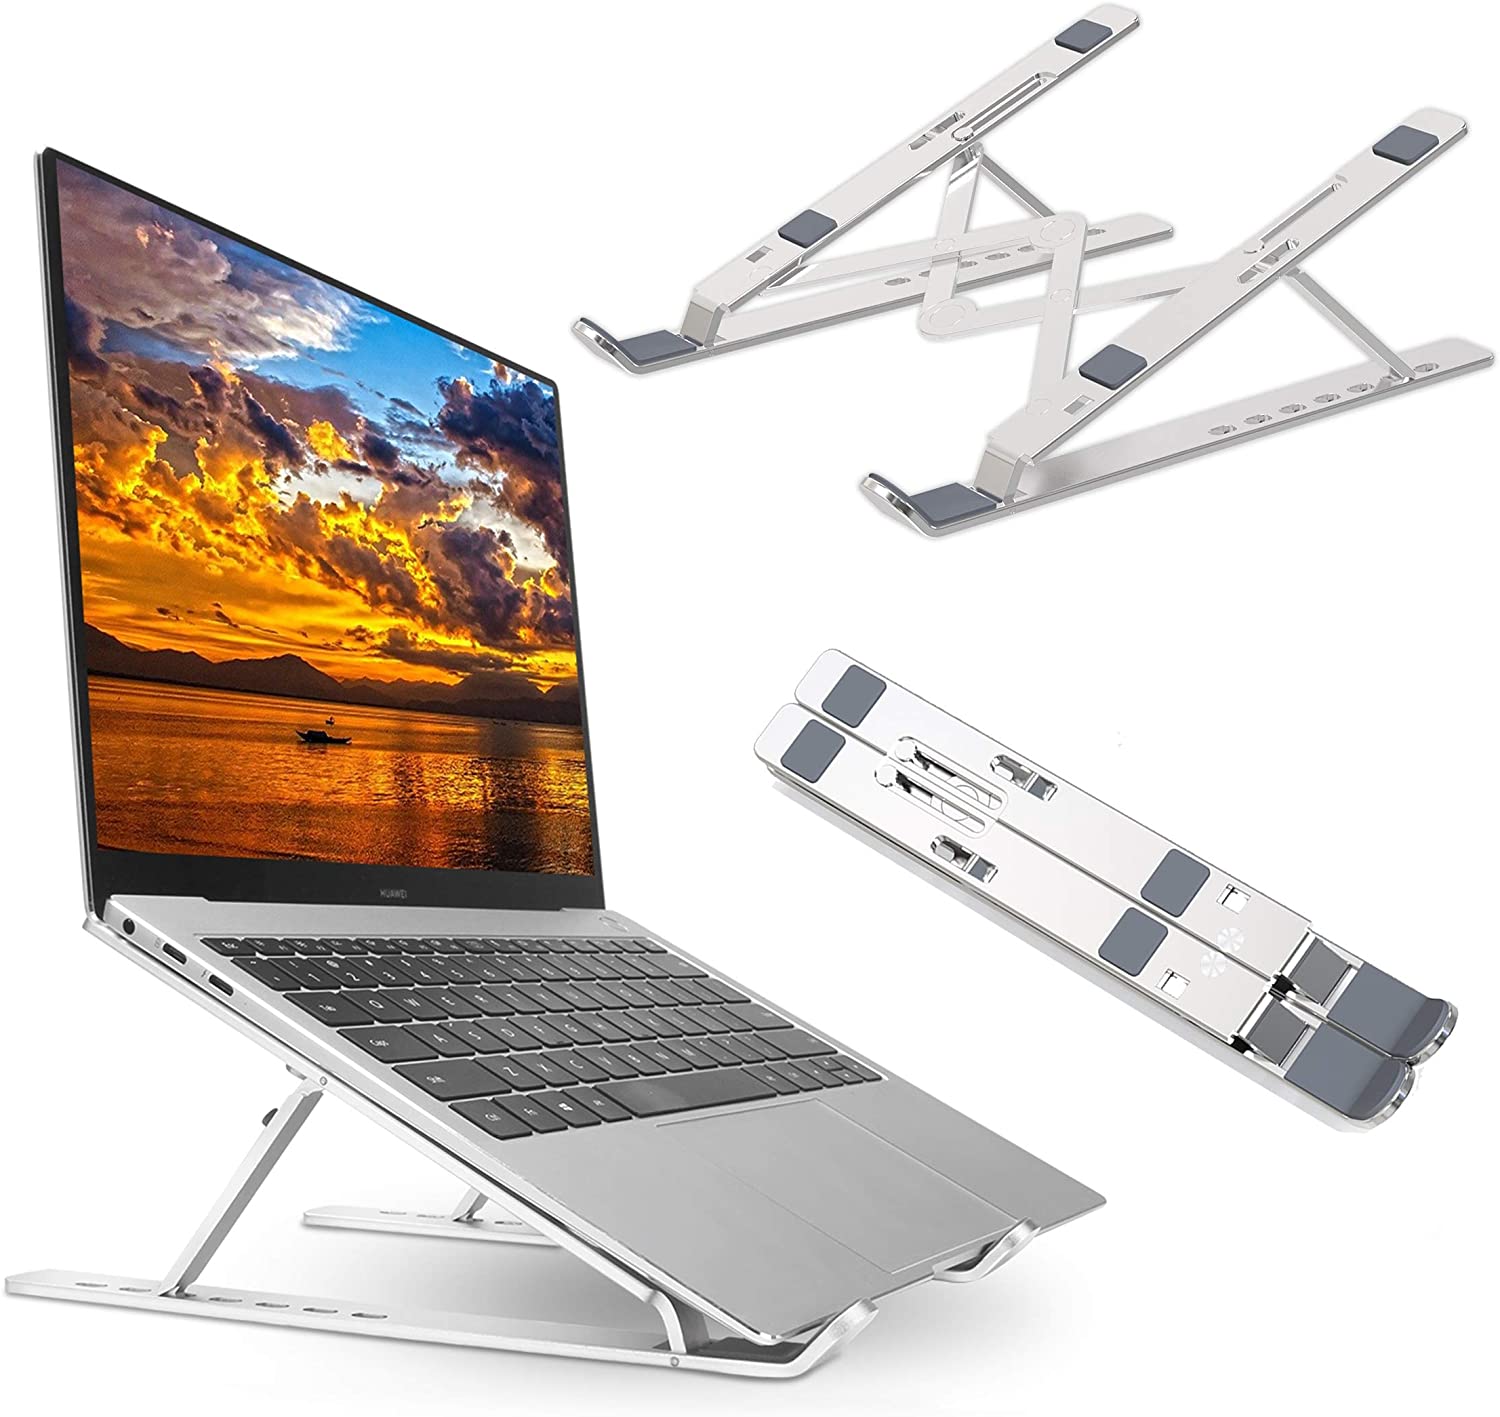 Adjustable Aluminum Foldable Portable Laptop Stand (Silver)